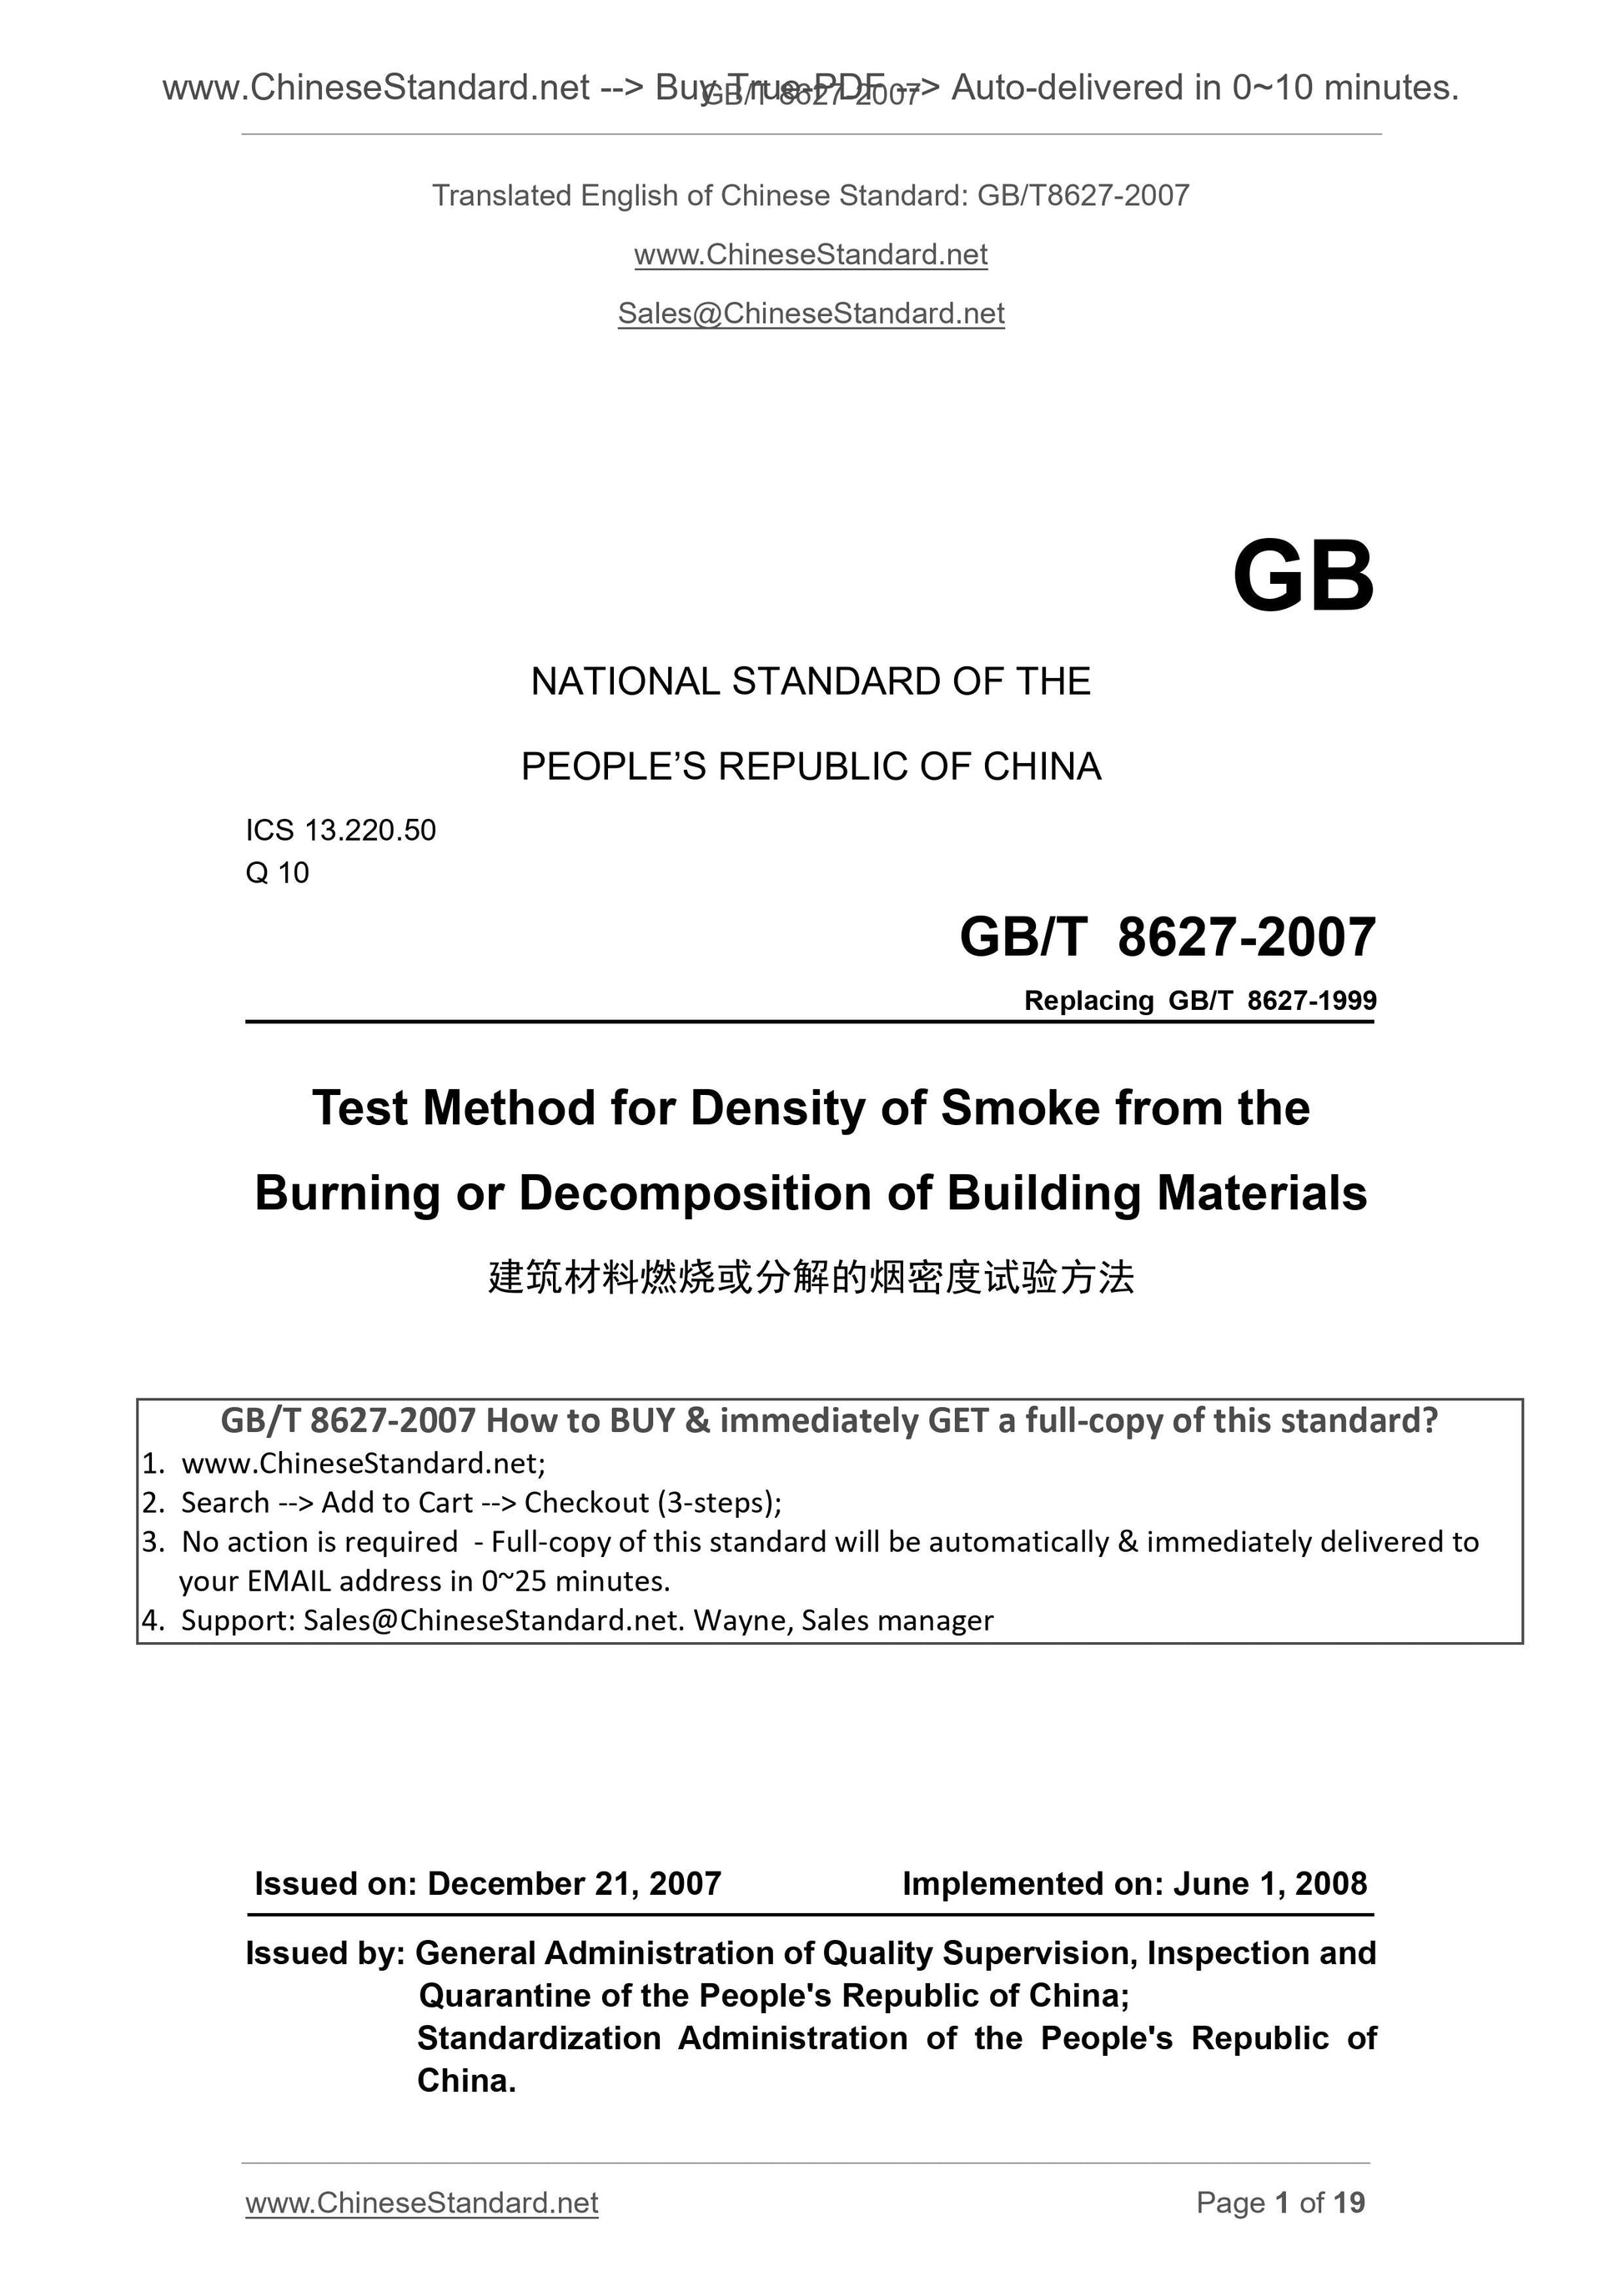 GB/T 8627-2007 Page 1